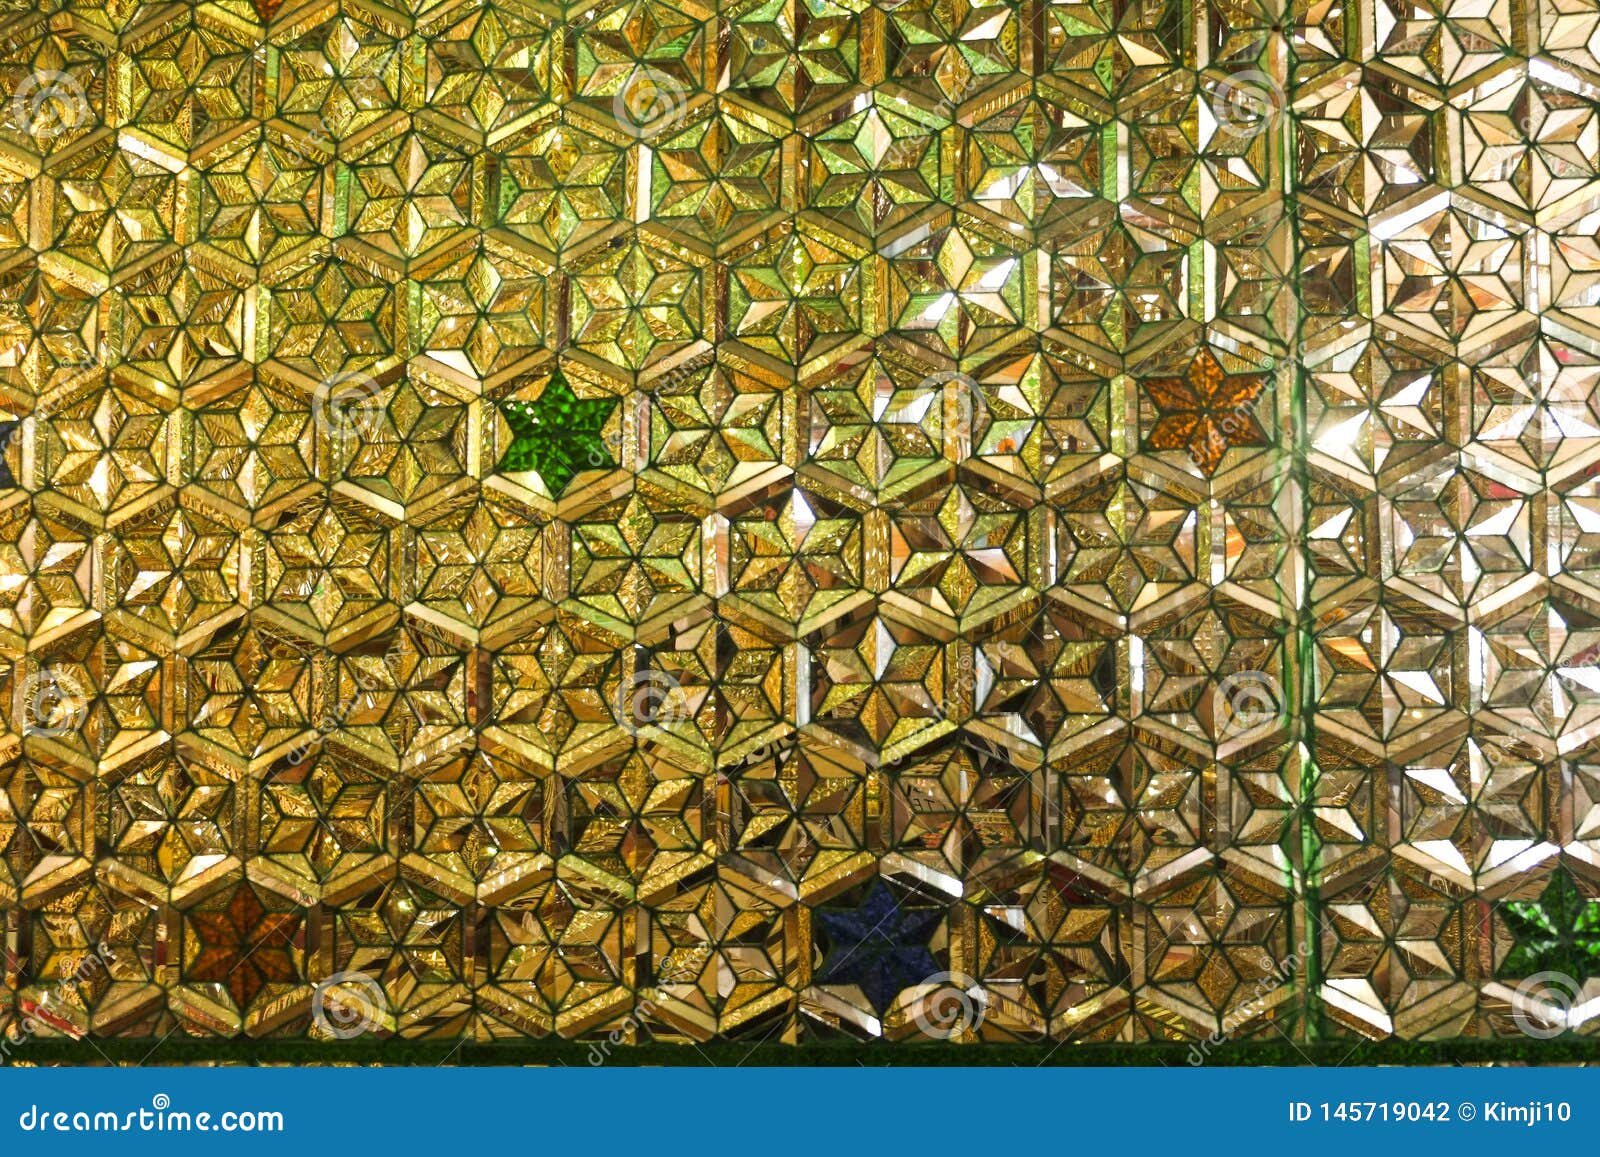 the pattern is decorated with gold decorated with beautiful patterns.wall pattern in boda town pagoda, yangon myanmar.